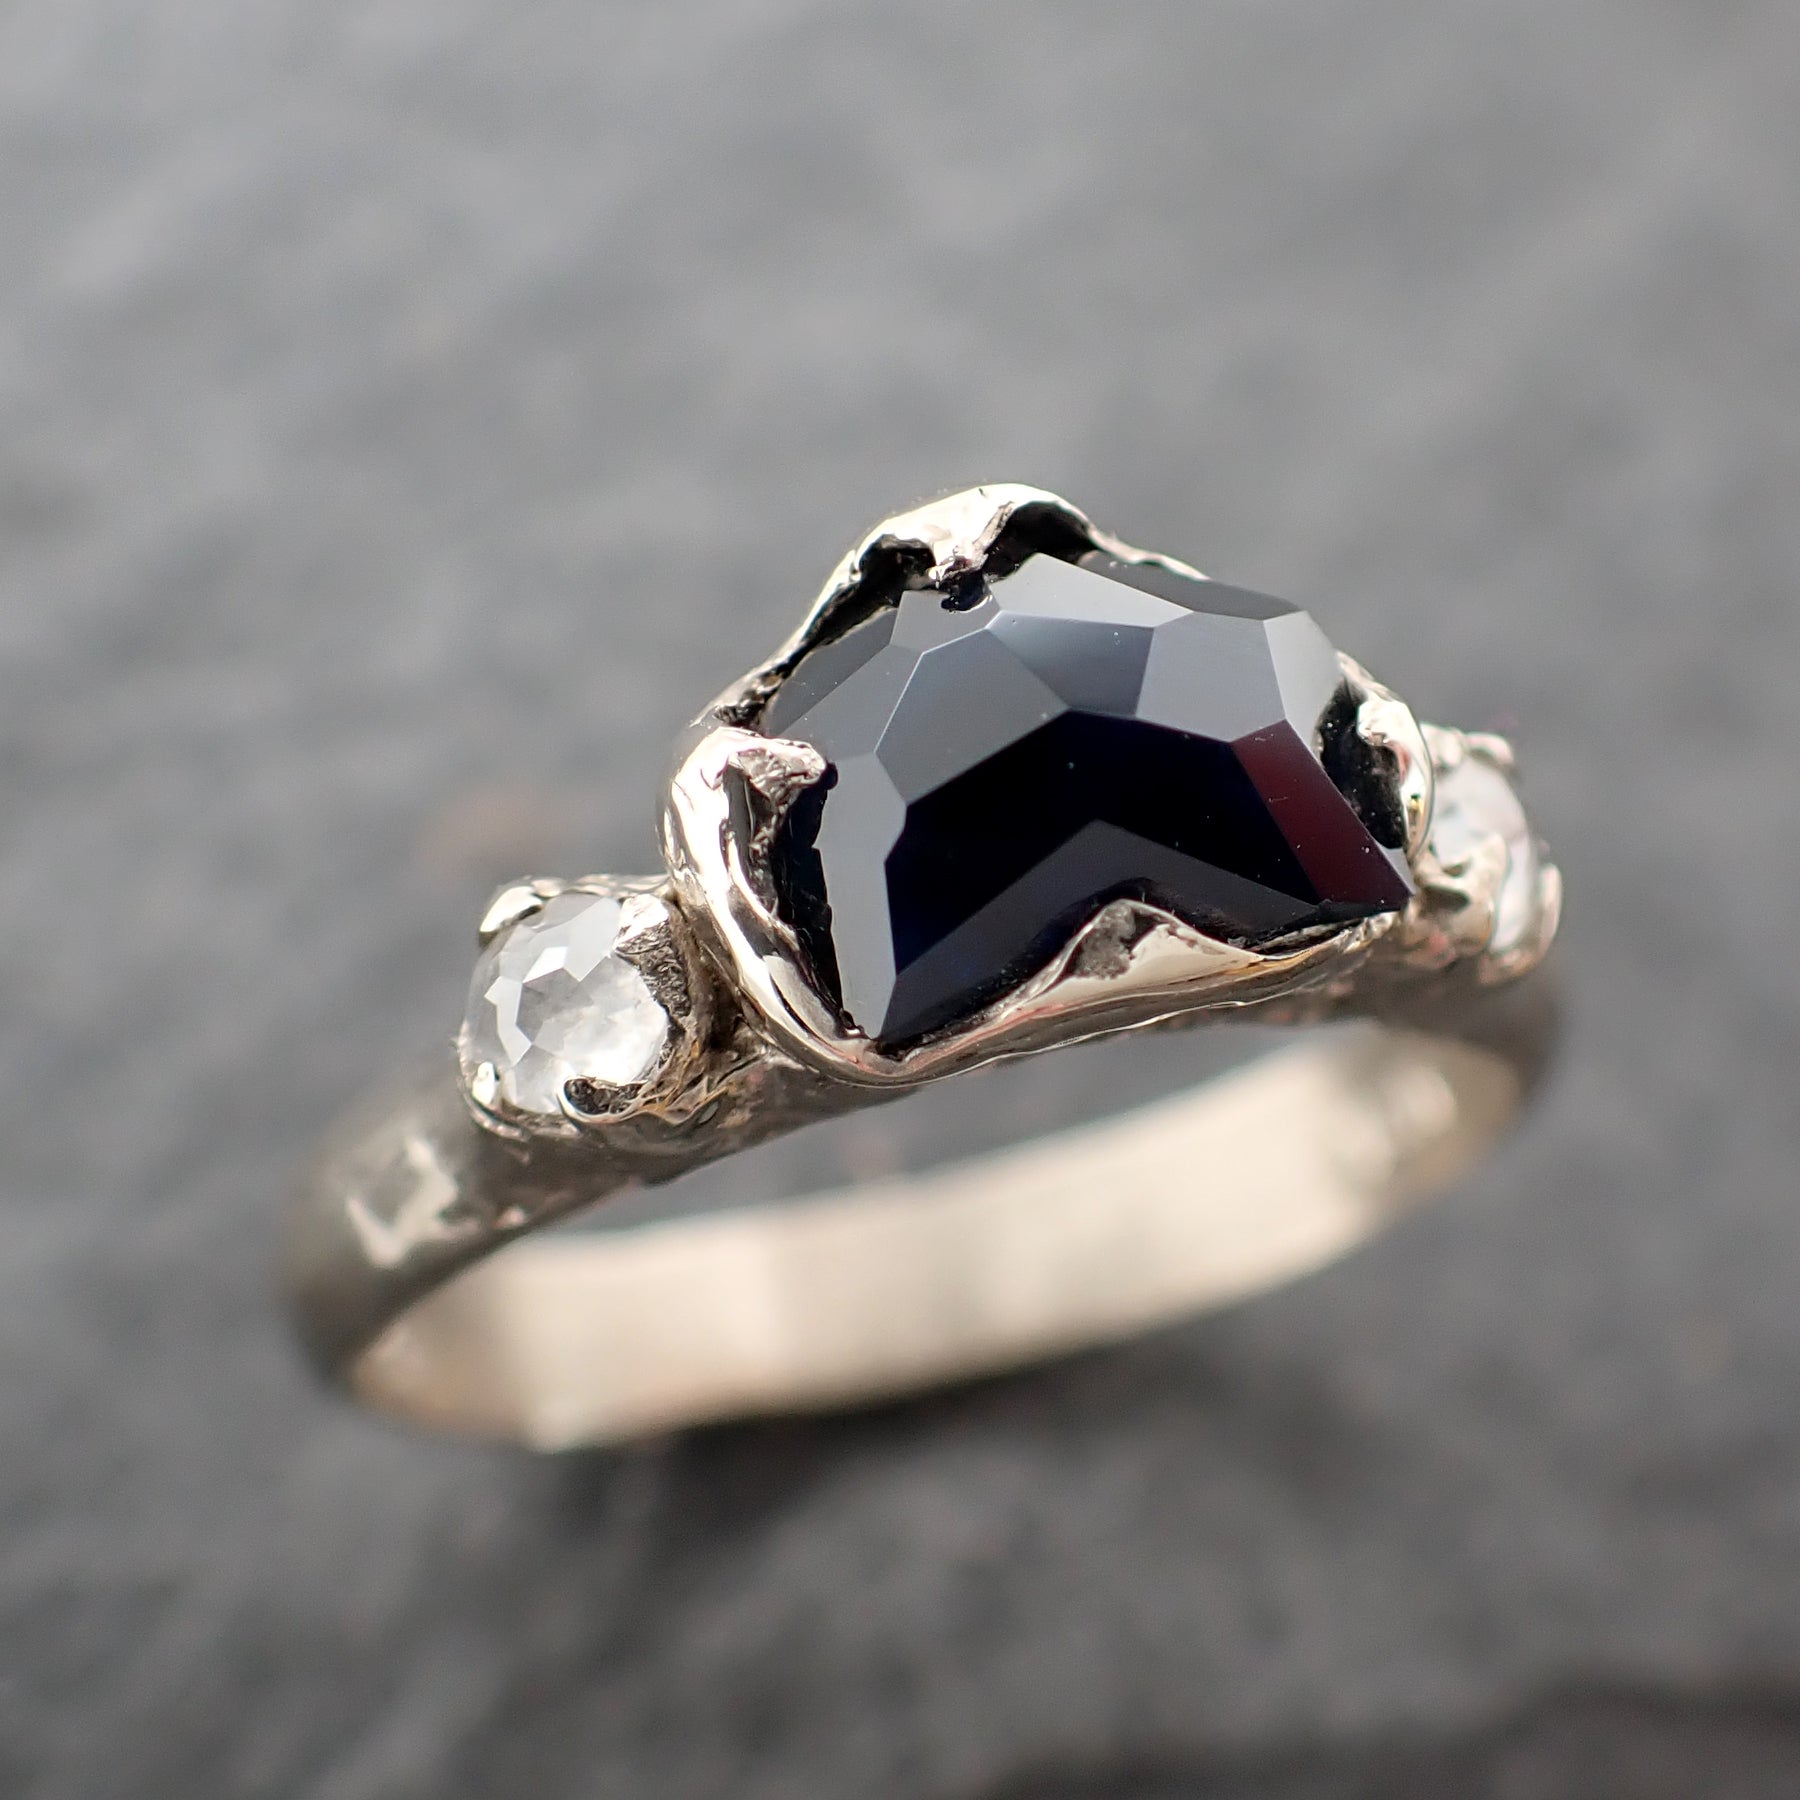 Partially faceted Sapphire and fancy cut Diamond 14k White Gold Engagement Ring Wedding Ring Custom Multi stone Gemstone Ring 2483